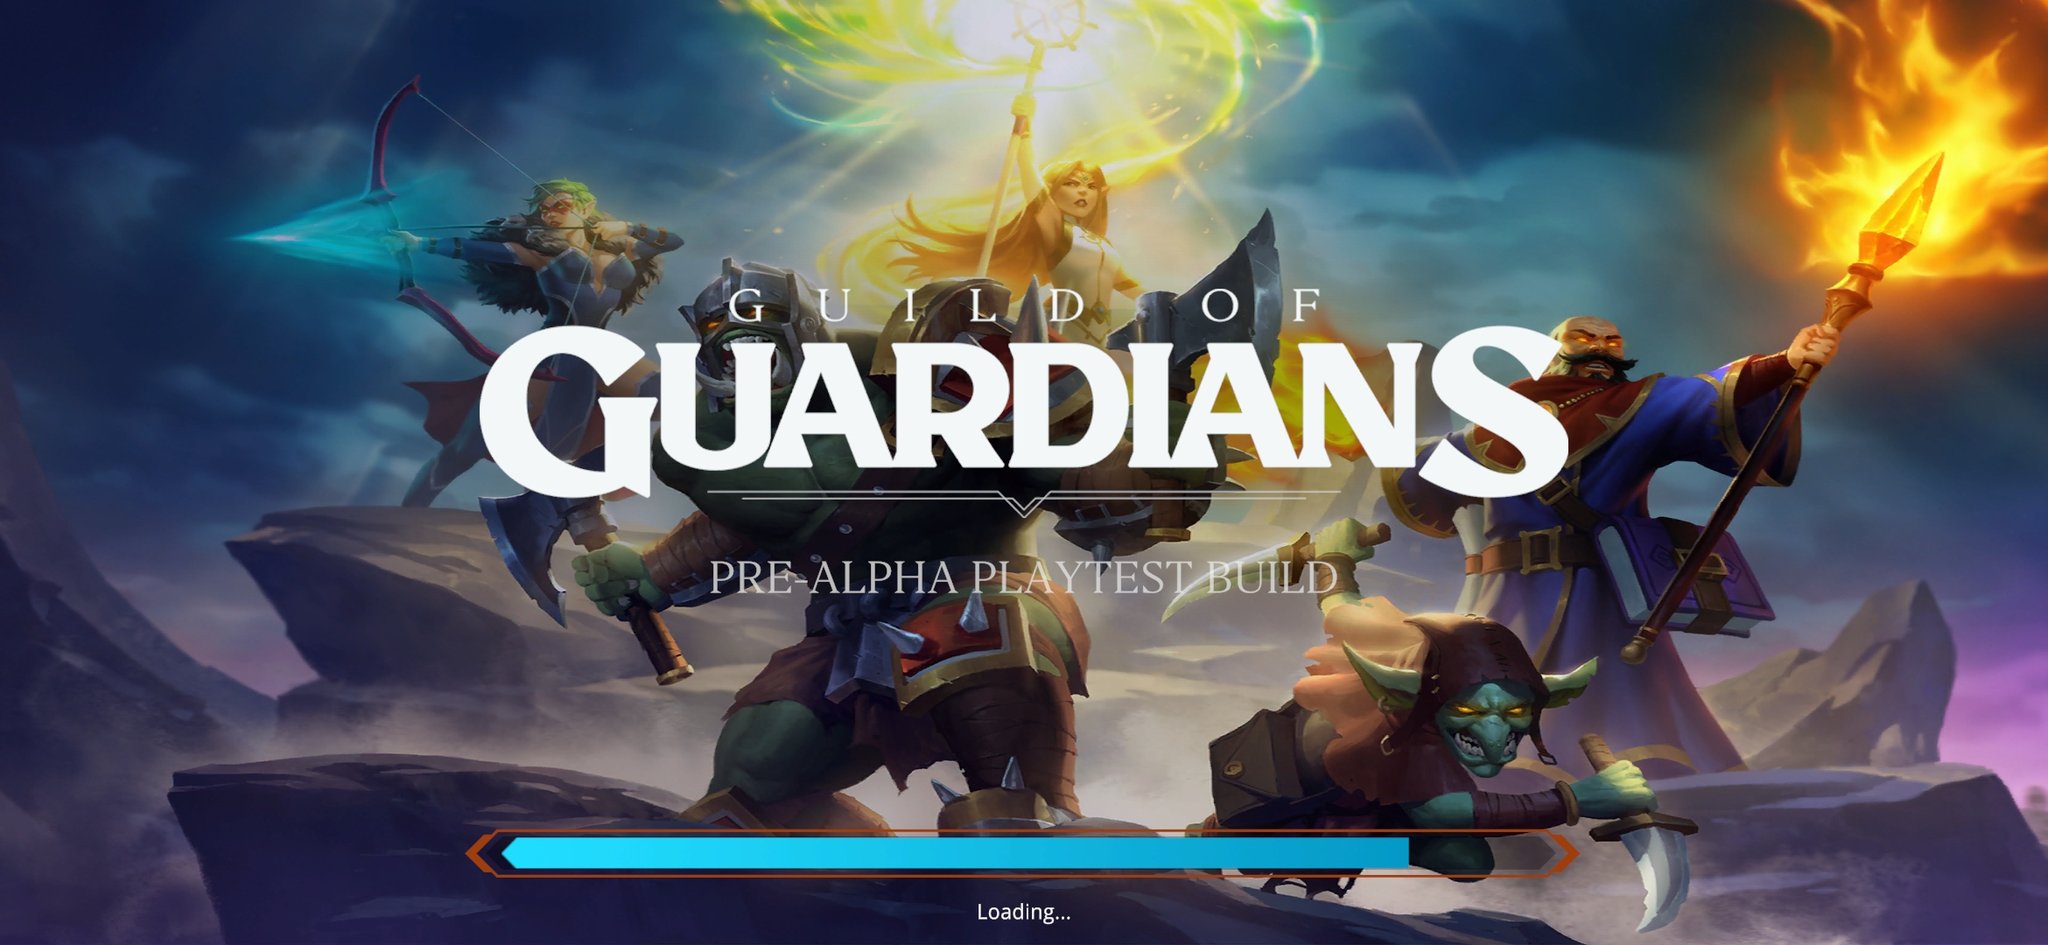 Guild of Guardians Launches Closed Alpha